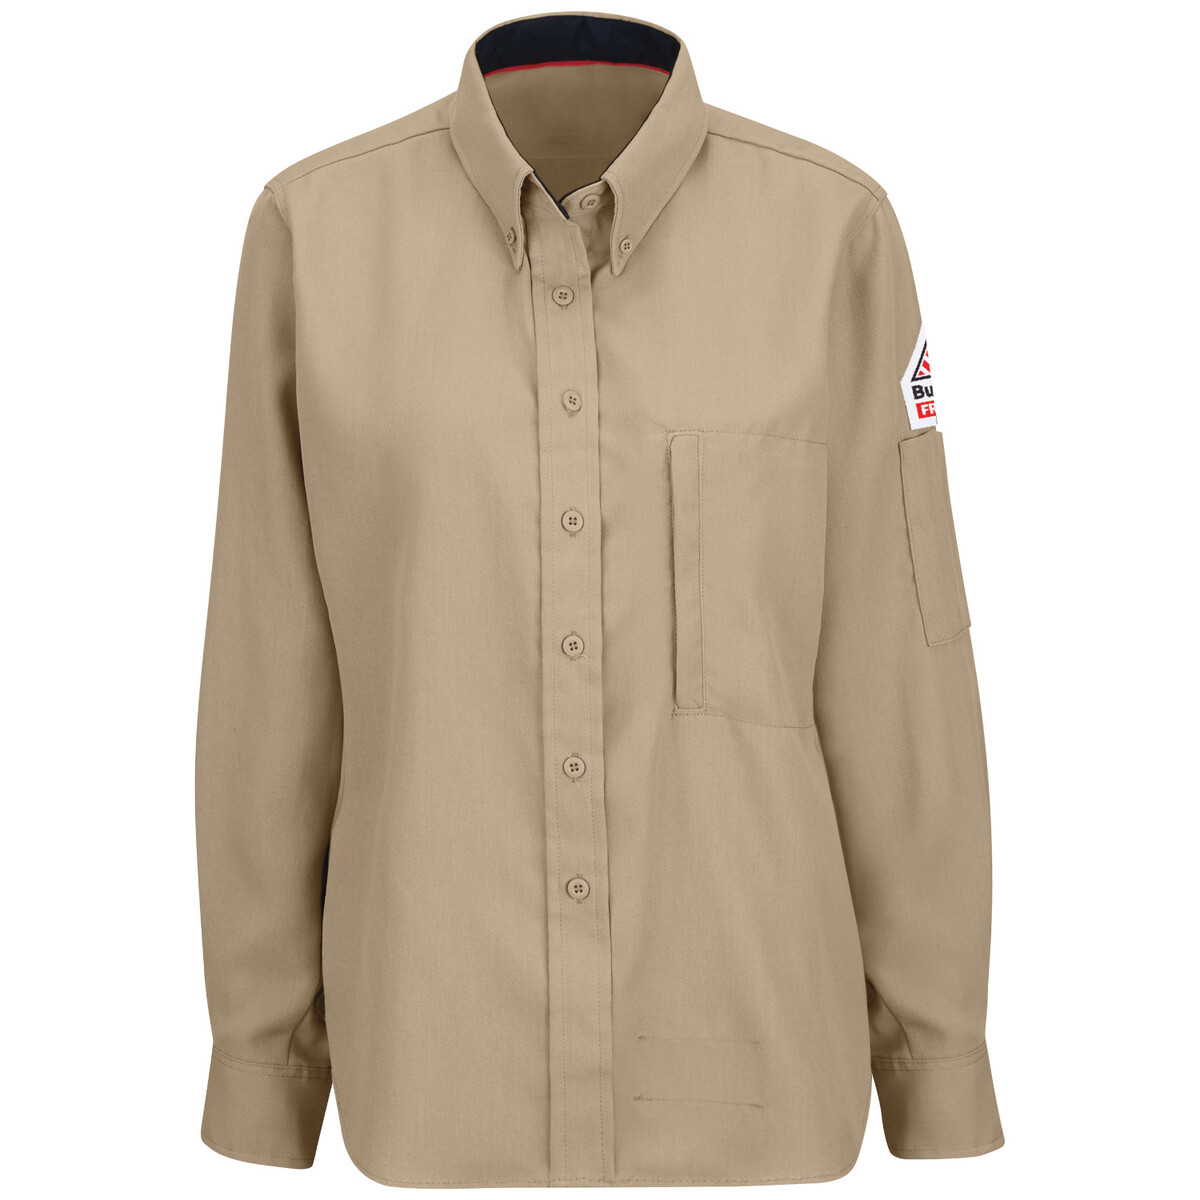 Bulwark® Ladies Small Regular Khaki Modacrylic/Cellulosic/Aramid IQ SERIES® Lightweight Flame Resistant Shirt With Button Front